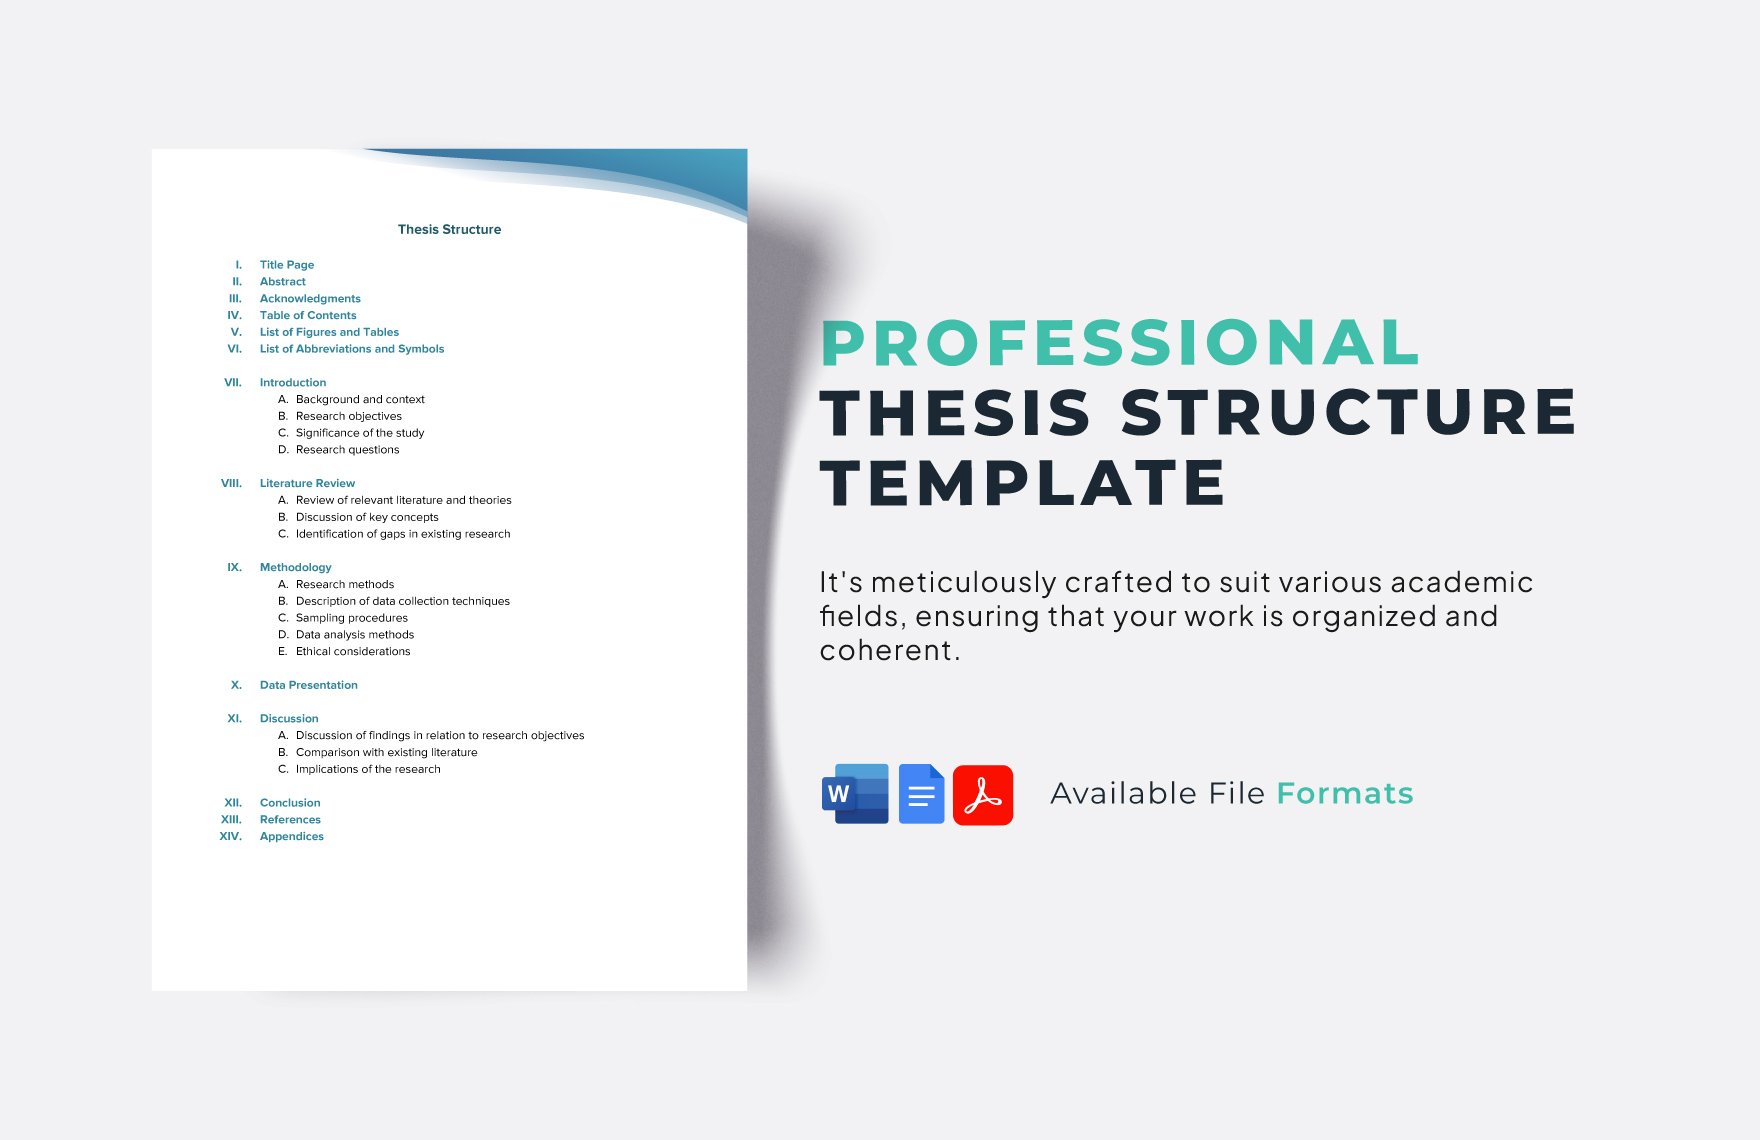 Thesis Structure Template